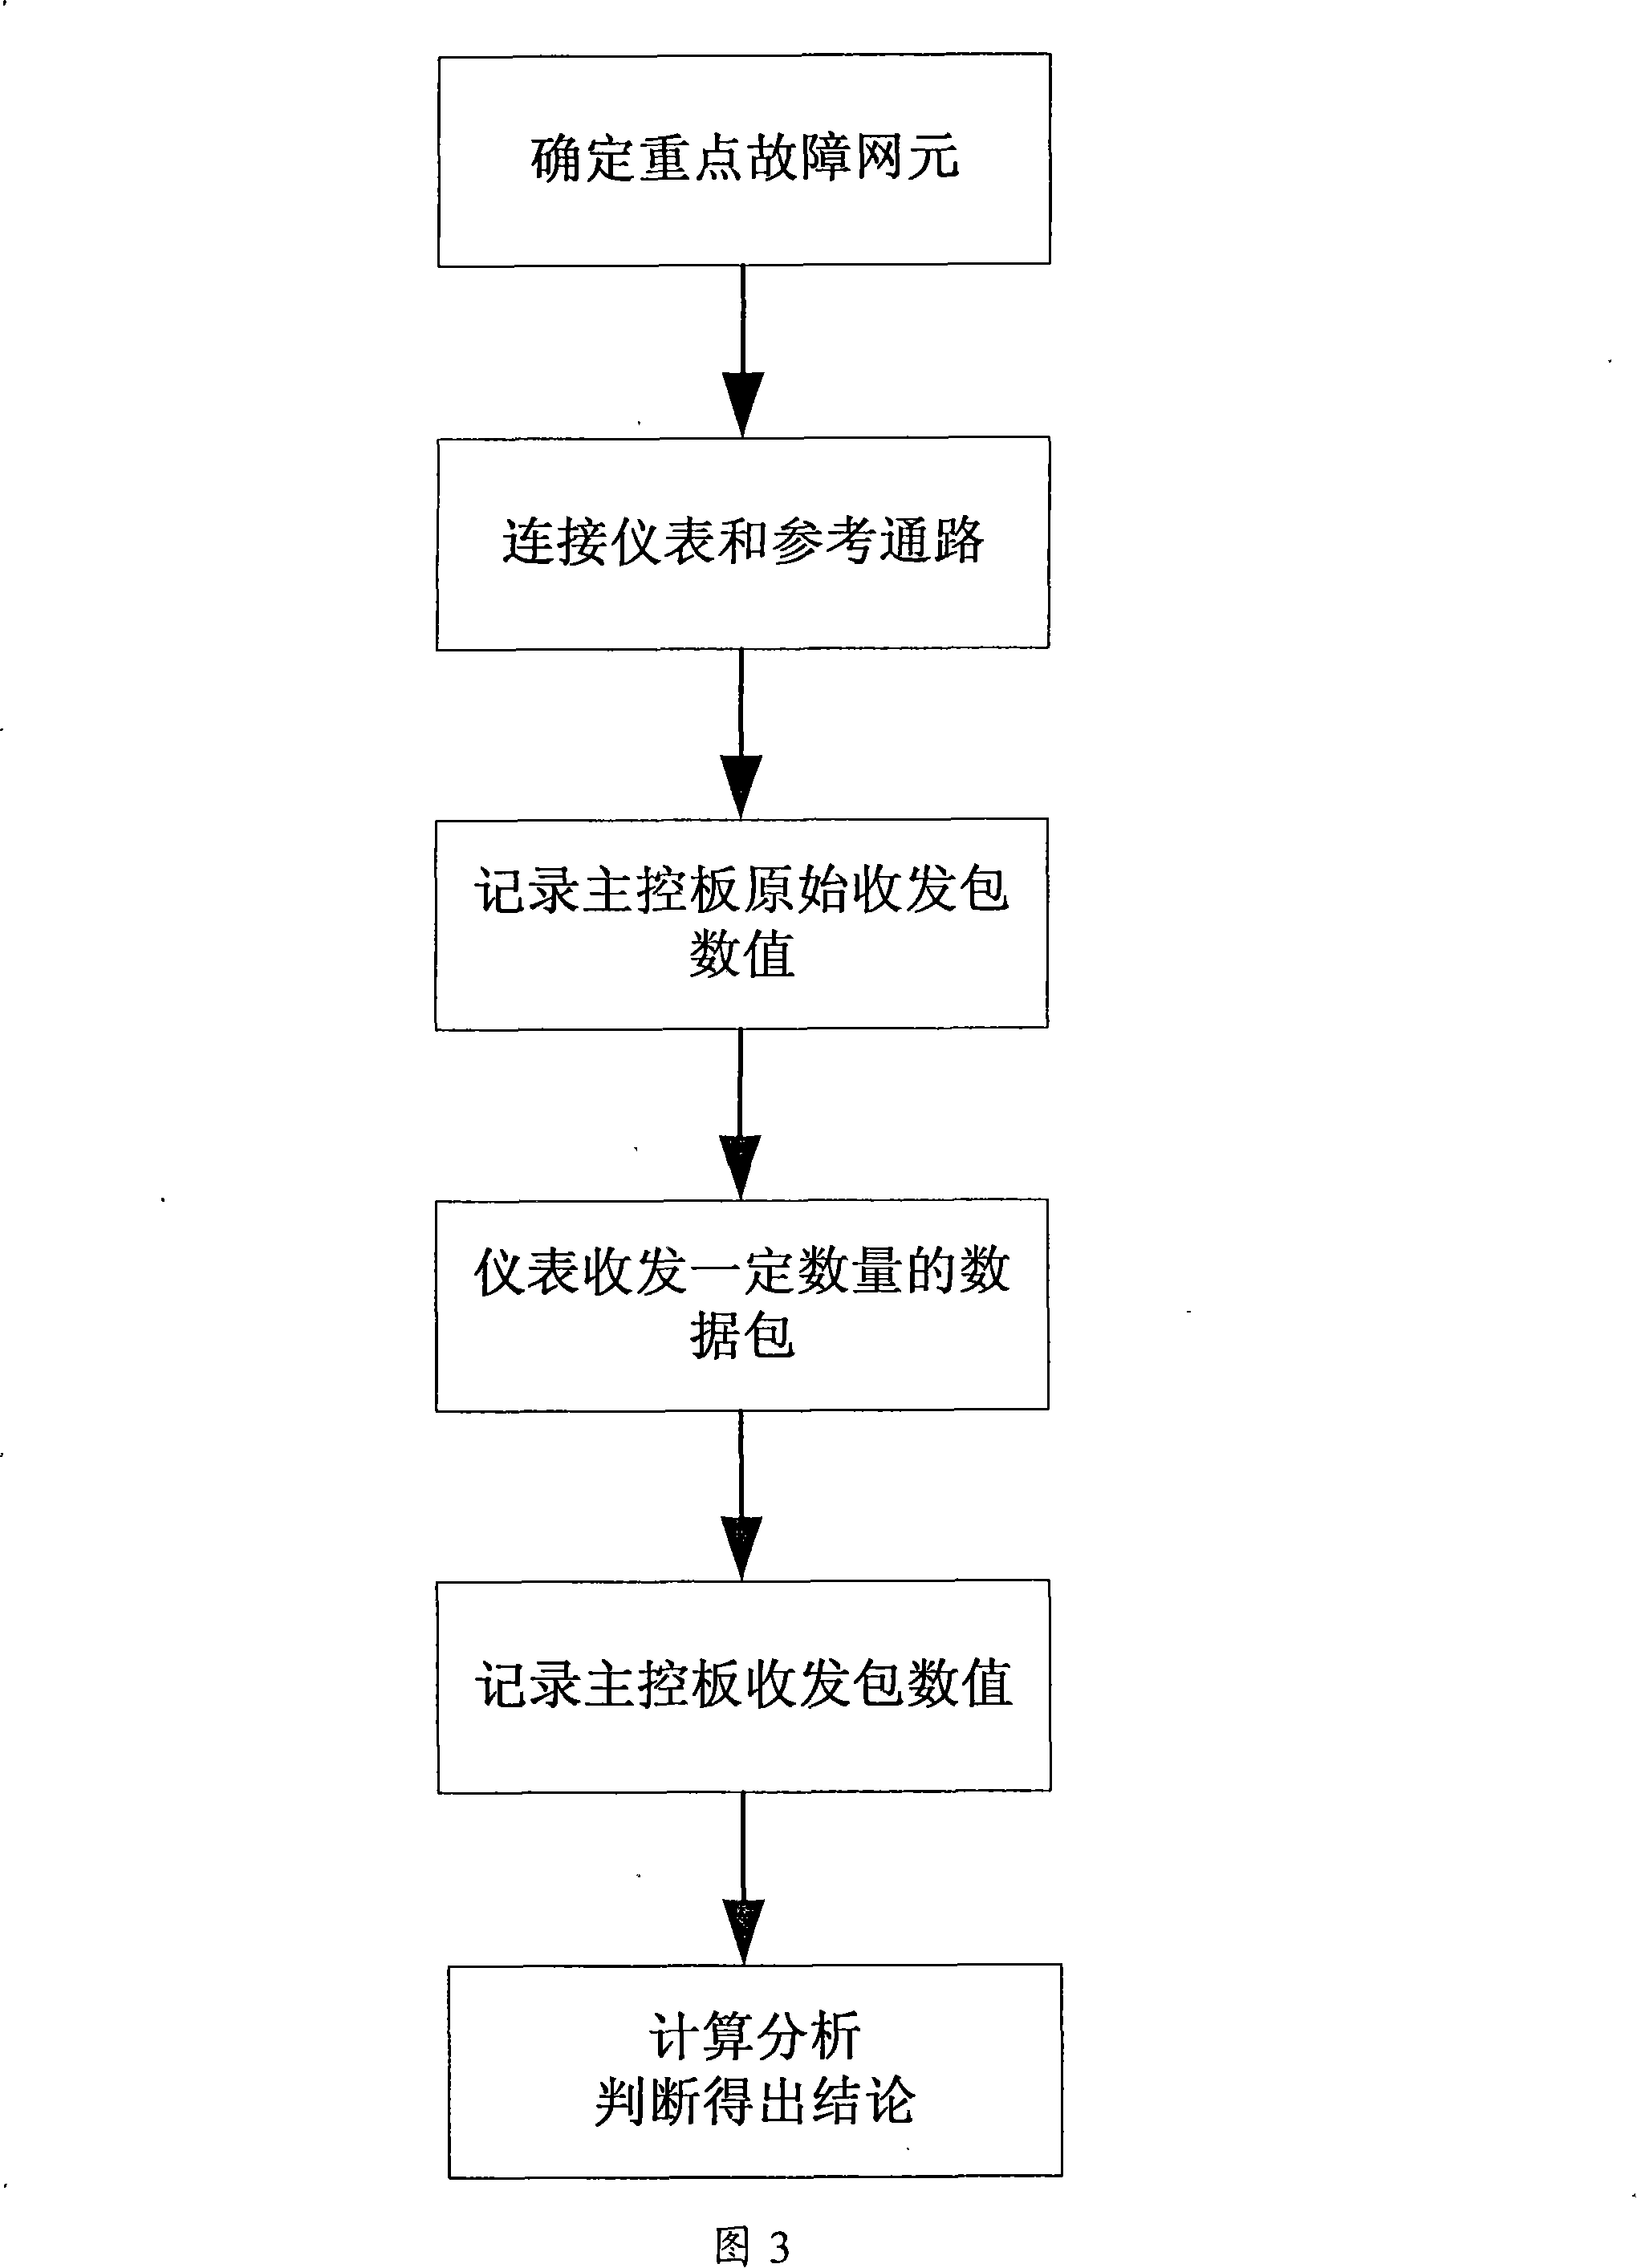 Method for locating embedded control path fault